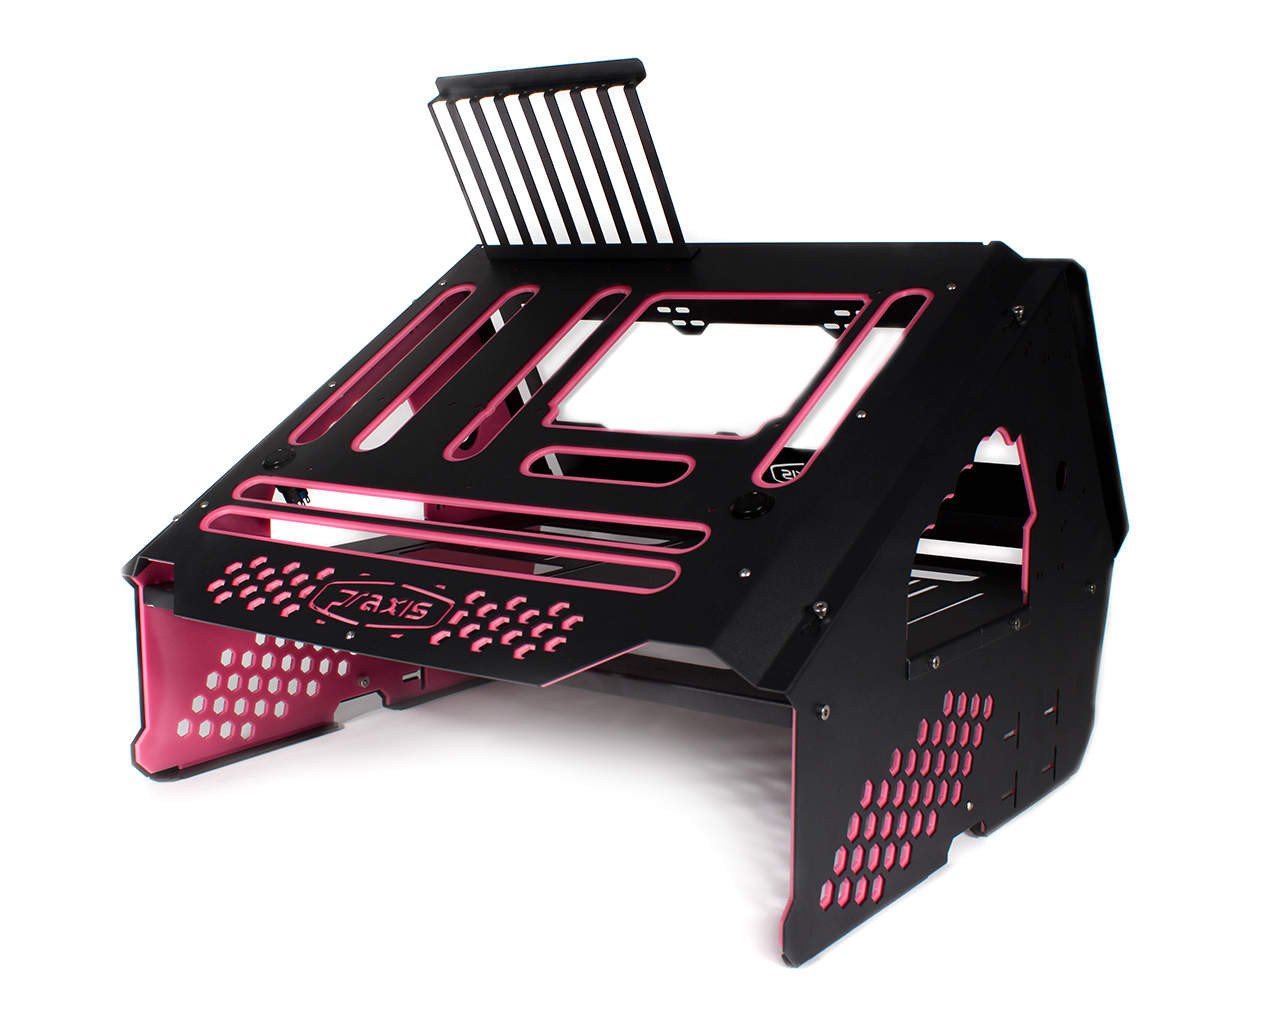 PrimoChill's Praxis Wetbench Powdercoated Steel Modular Open Air Computer Test Bench for Watercooling or Air Cooled Components - PrimoChill - KEEPING IT COOL Black w/Solid Light Pink Accents